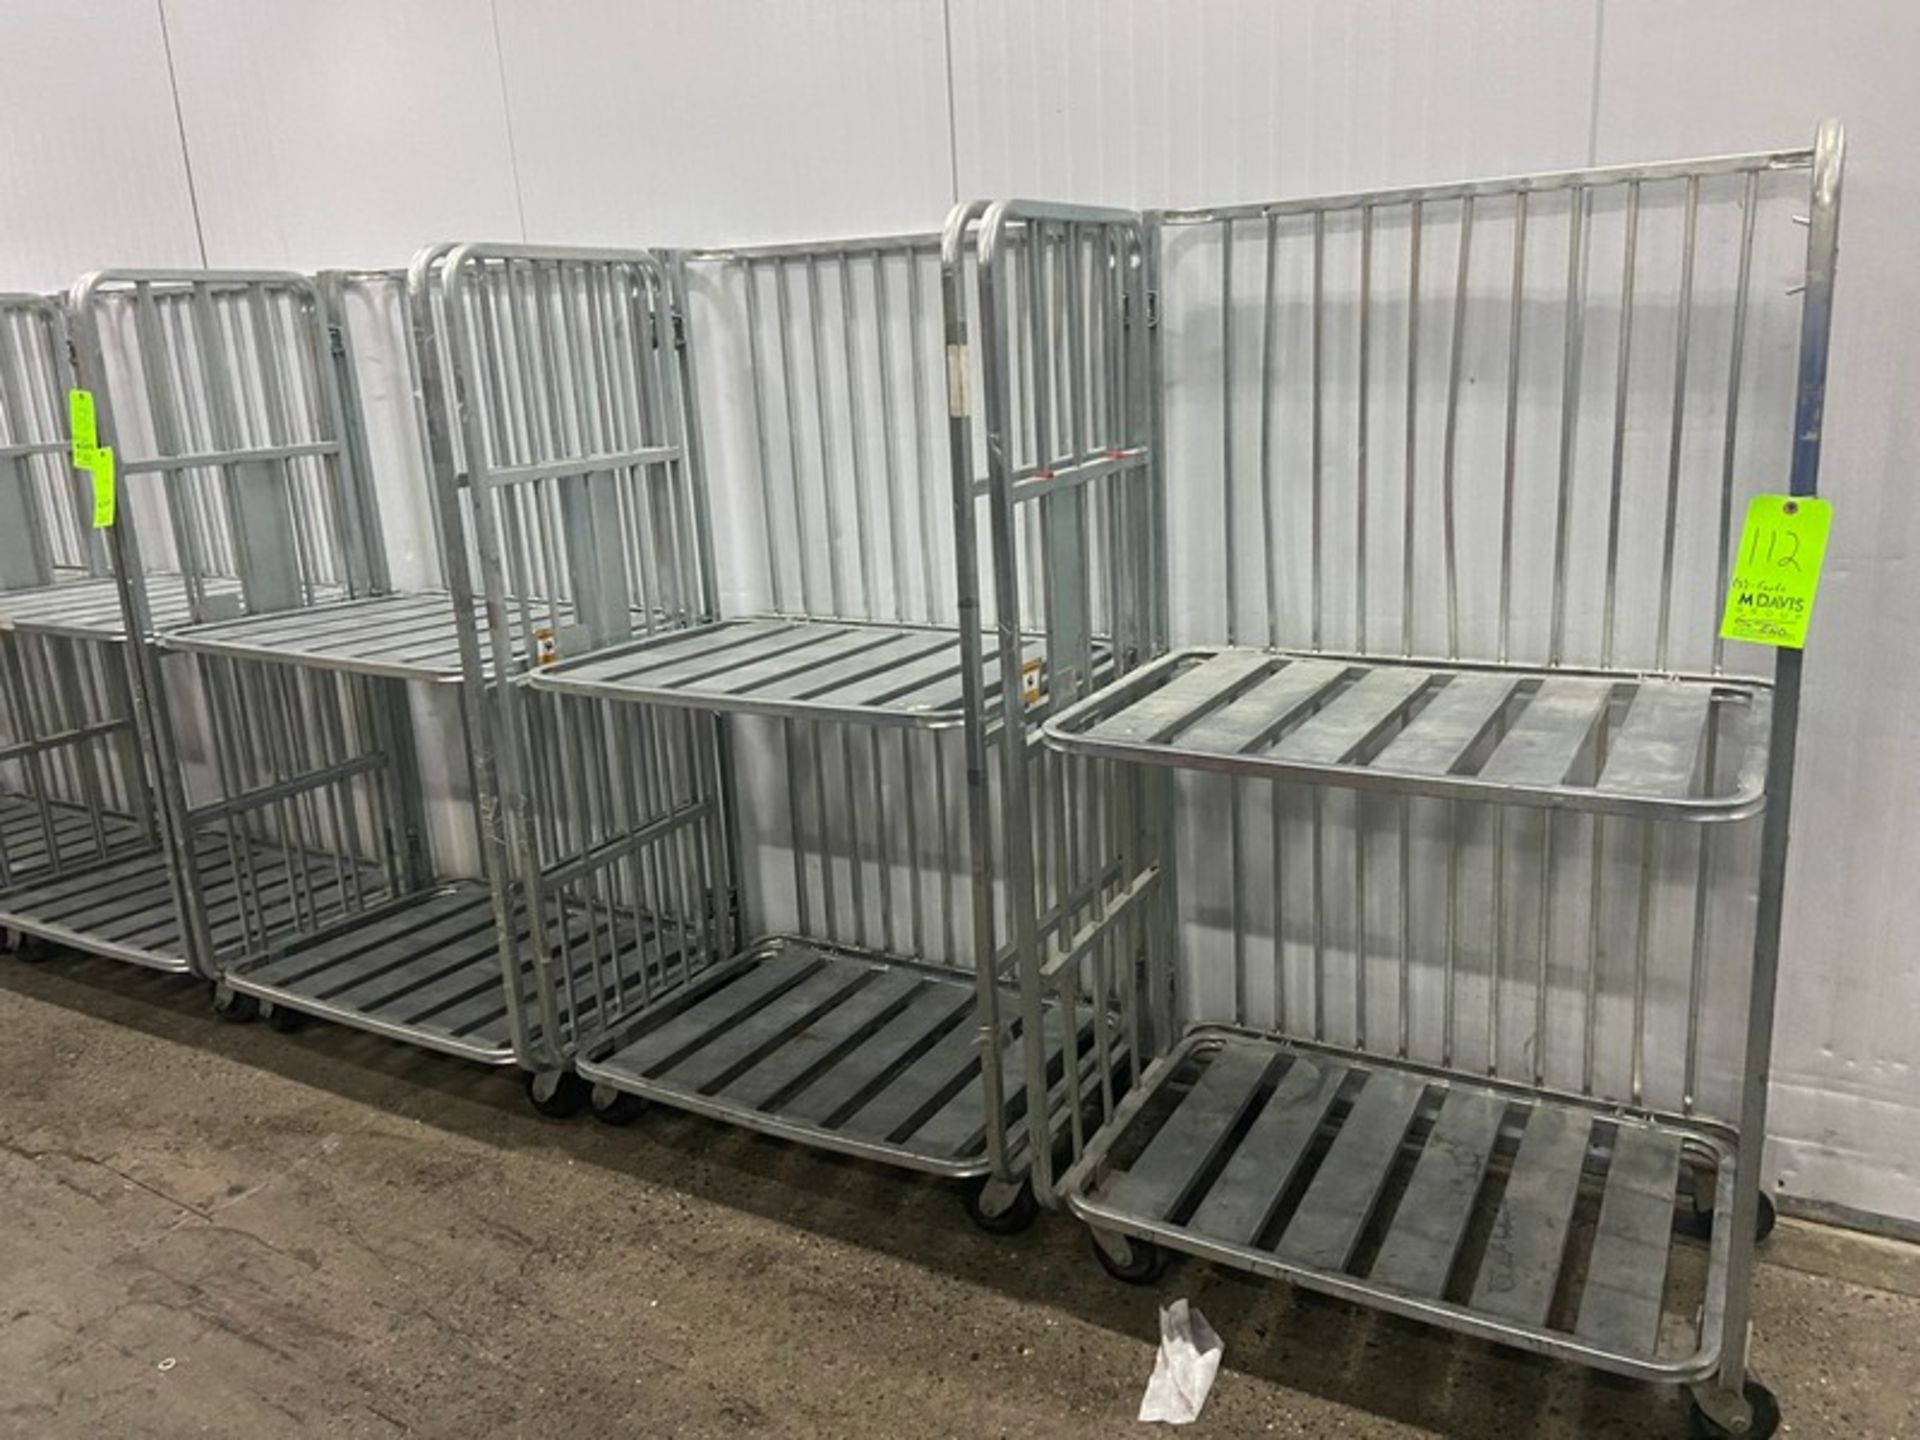 (3) Aluminum 2-Level Cage Carts, Overall Dims.: Aprox. 39" L x 29" W x 68-1/2" H (LOCATED IN RED - Image 2 of 3